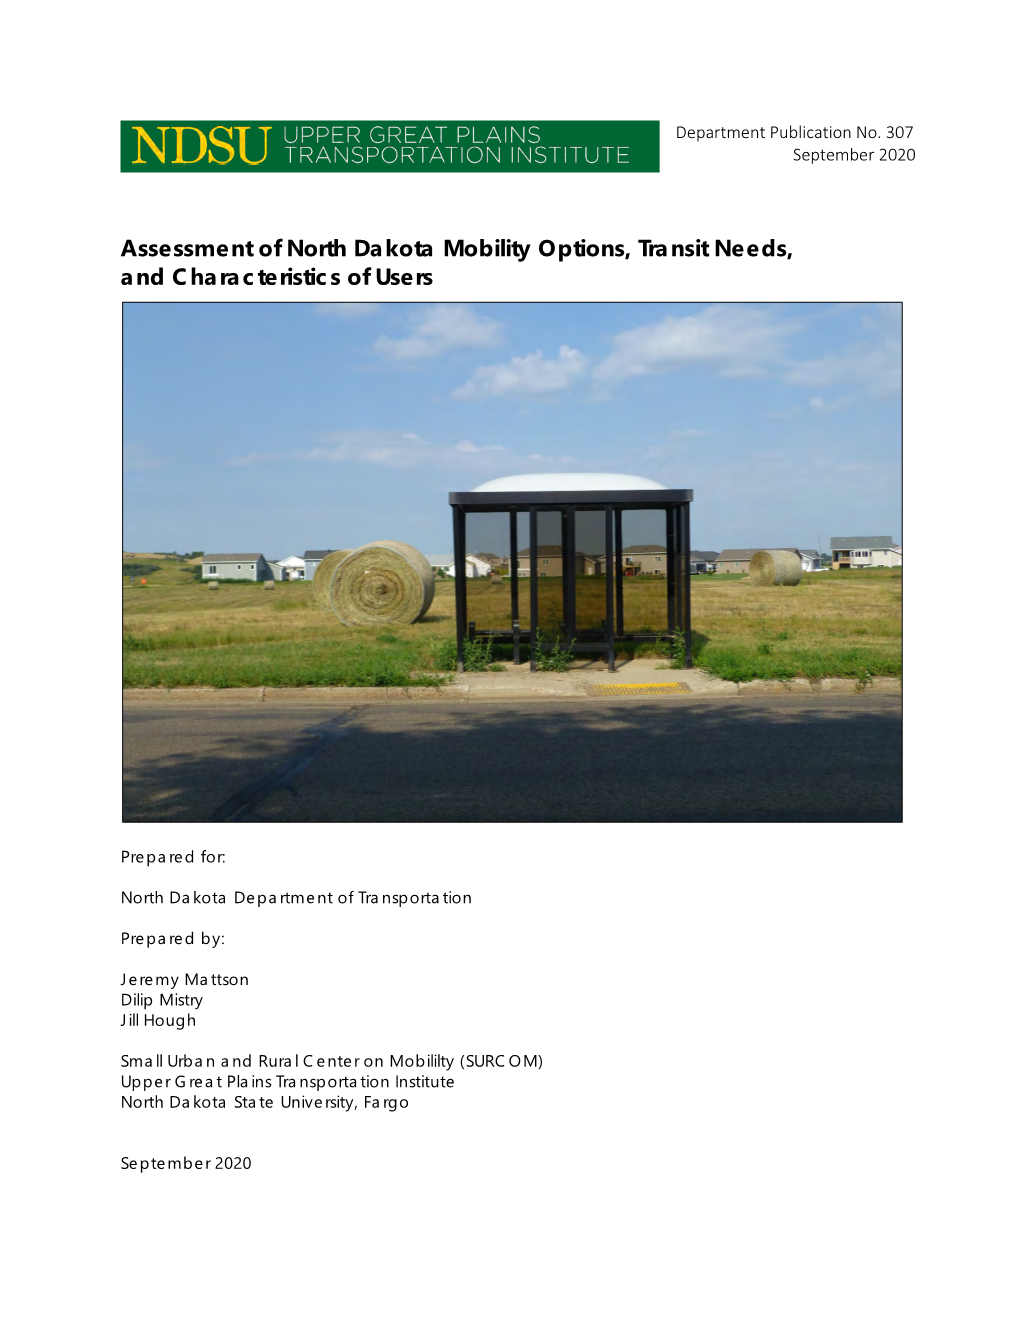 Assessment of North Dakota Mobility Options, Transit Needs, and Characteristics of Users